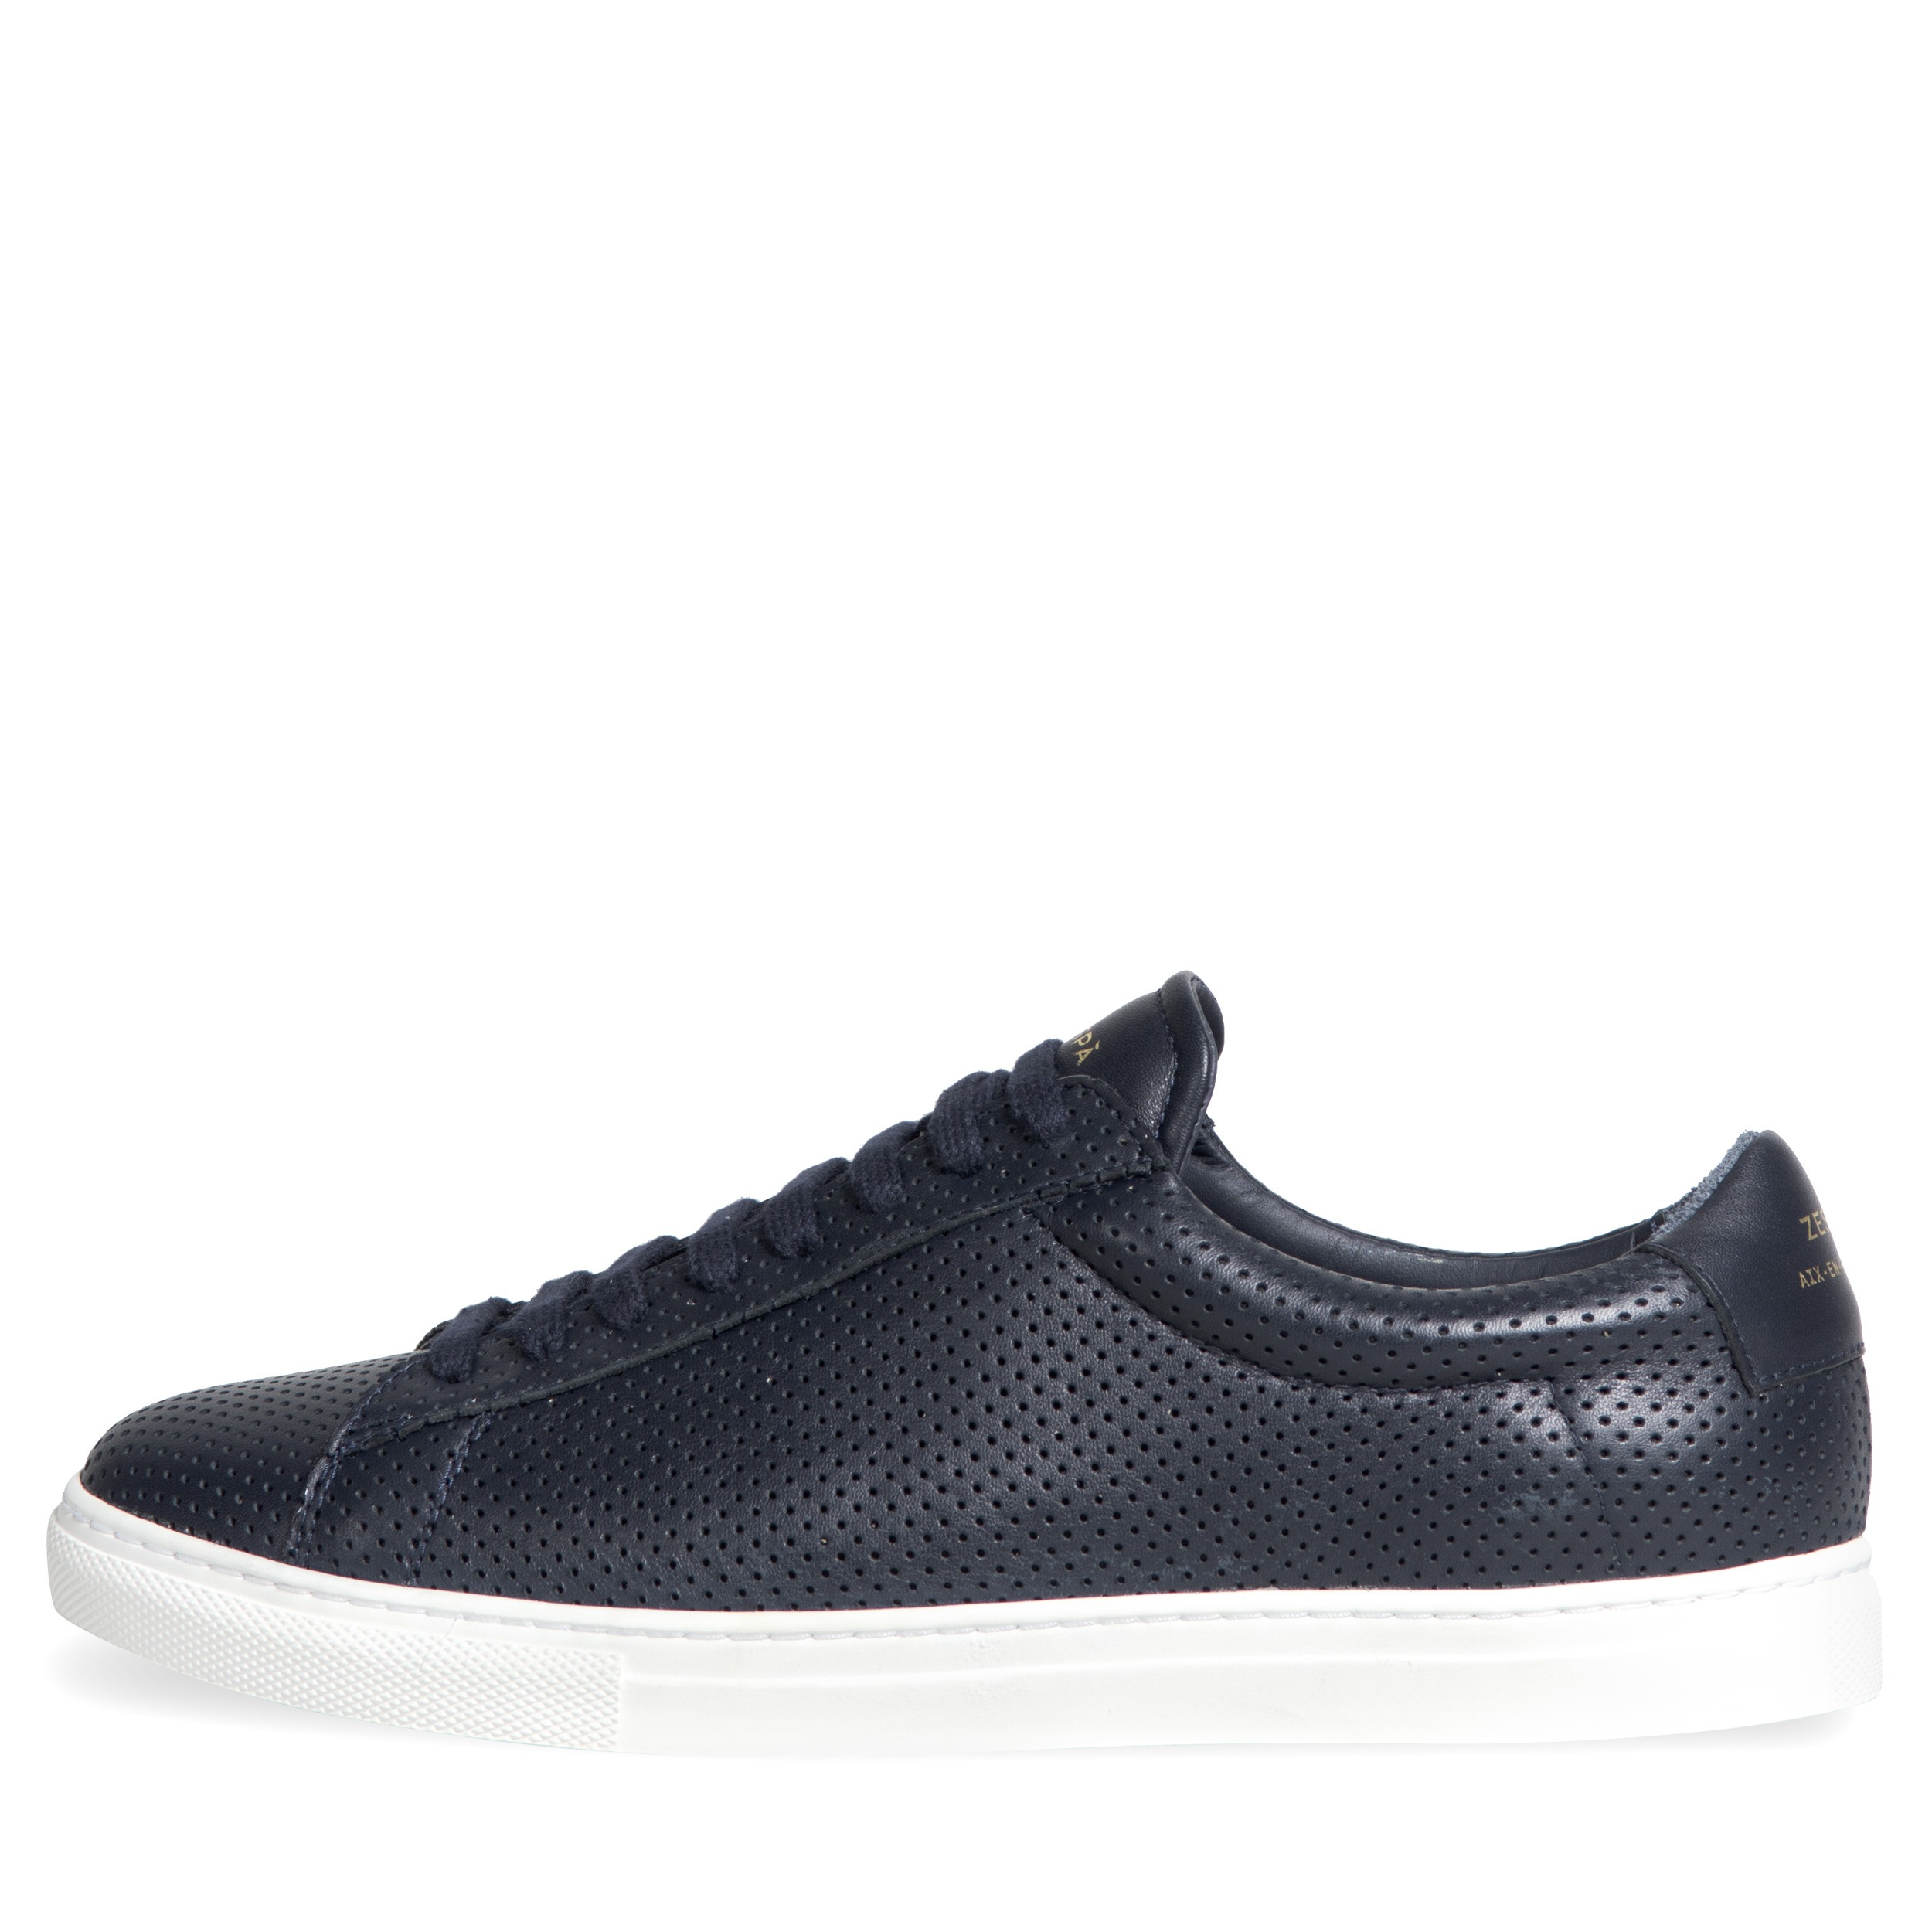 ZESPA ’ZSP4’ Nappa Perforated Leather Trainer Navy